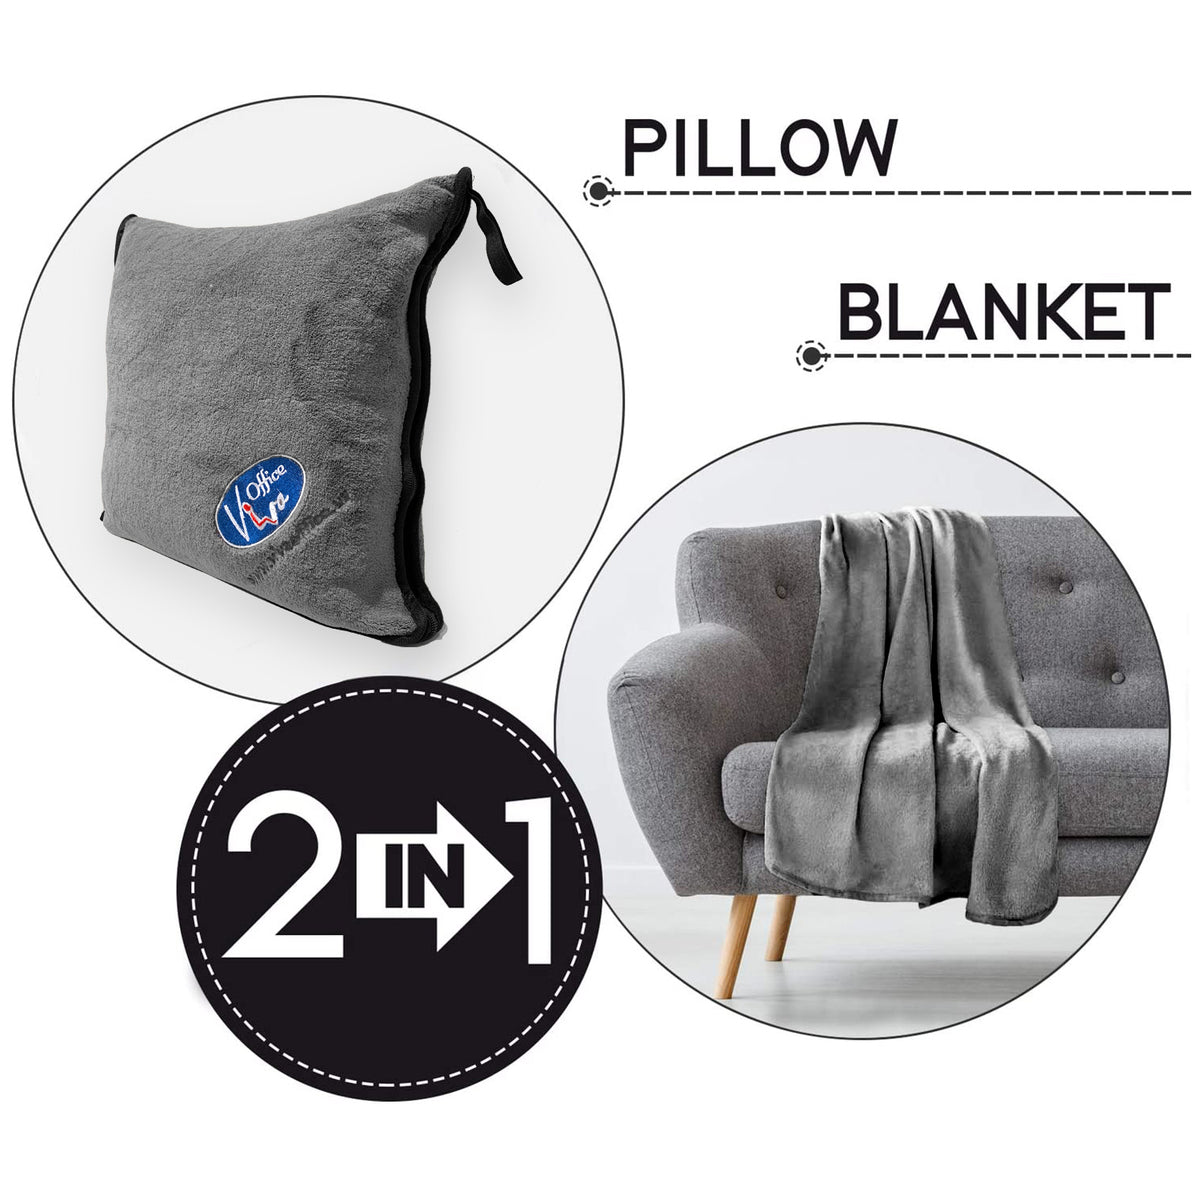 Viva Office US Travel Blanket and Pillow - Premium Plush Soft 2 in 1 Airplane Blanket with Soft Zip Bag Pillowcase